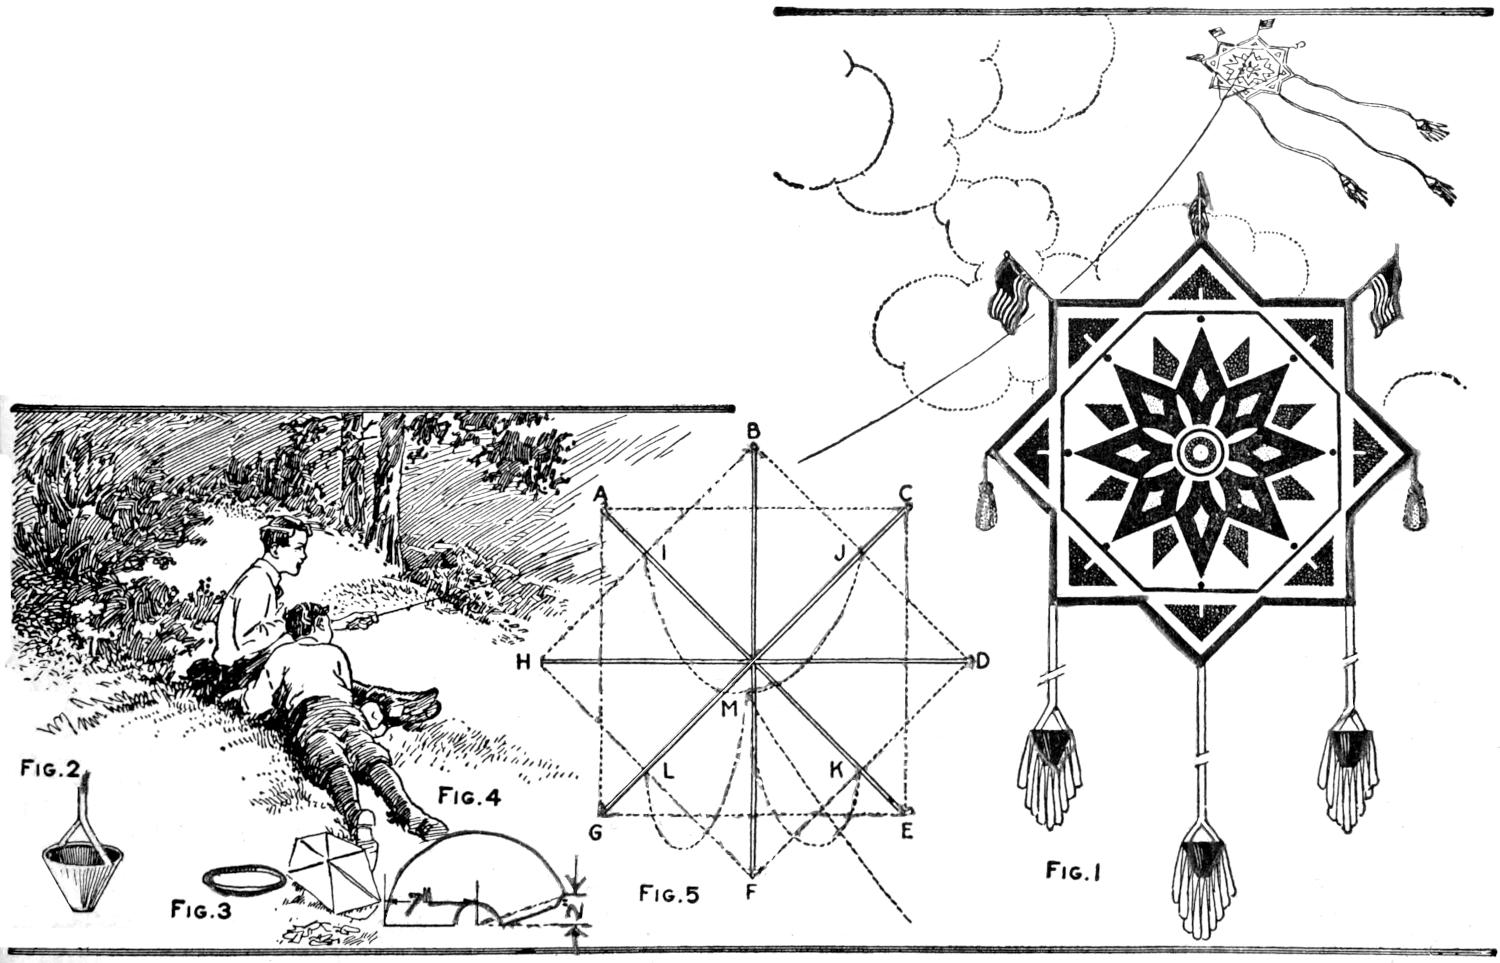 Details of the kite, and flying it